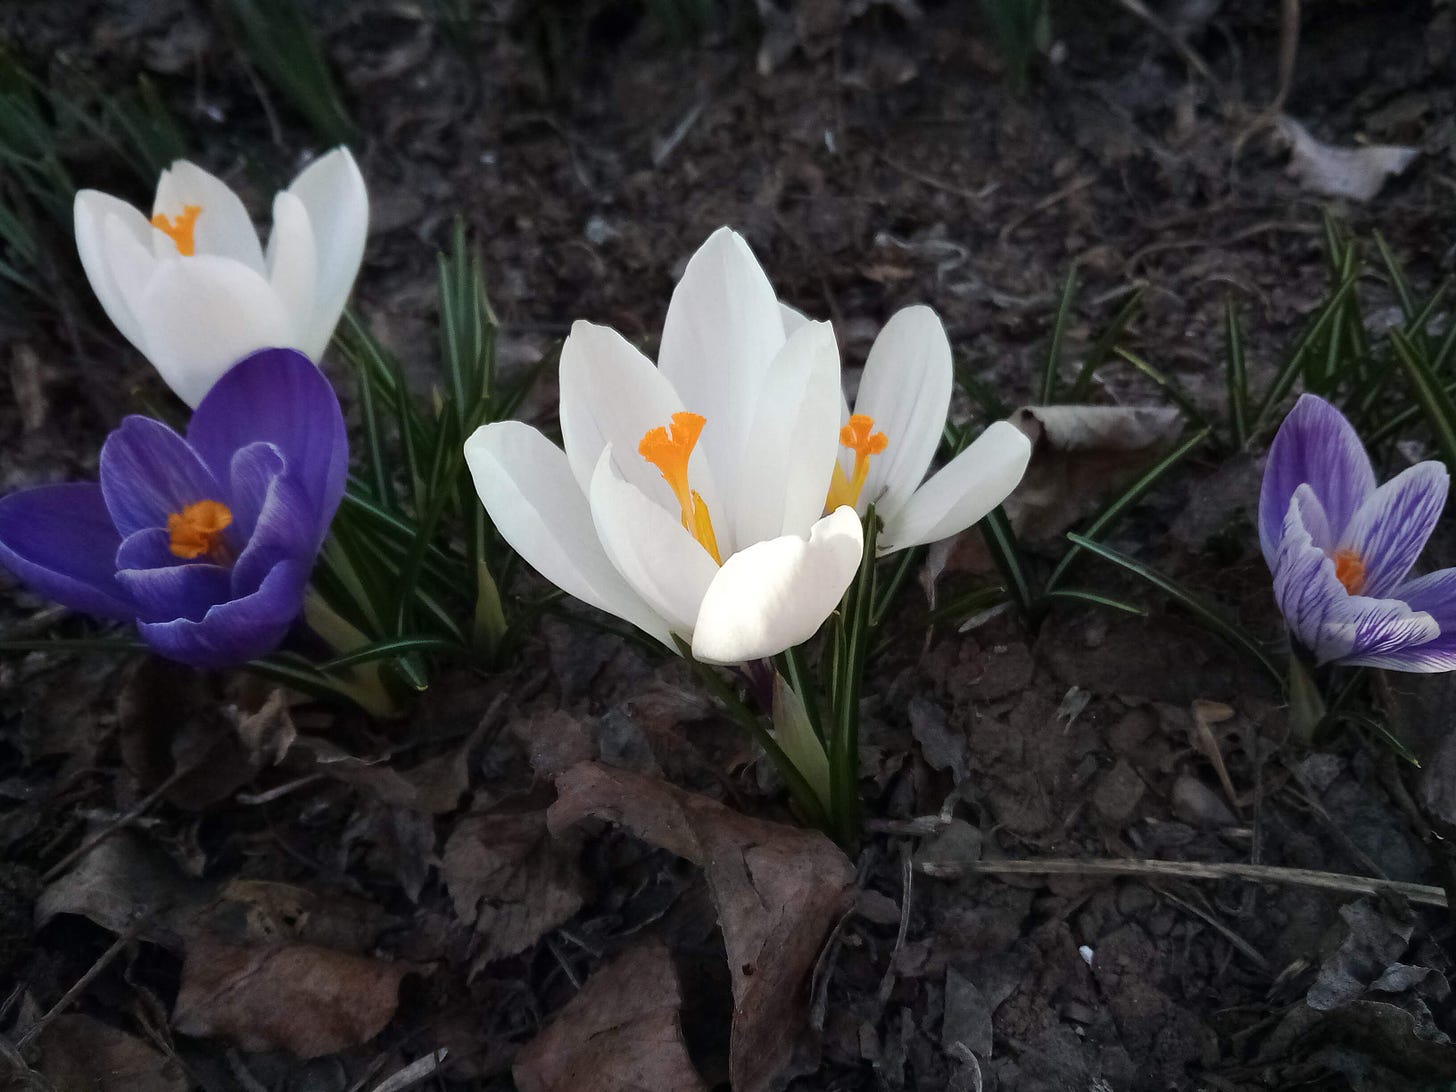 Blooming white and purple crocus